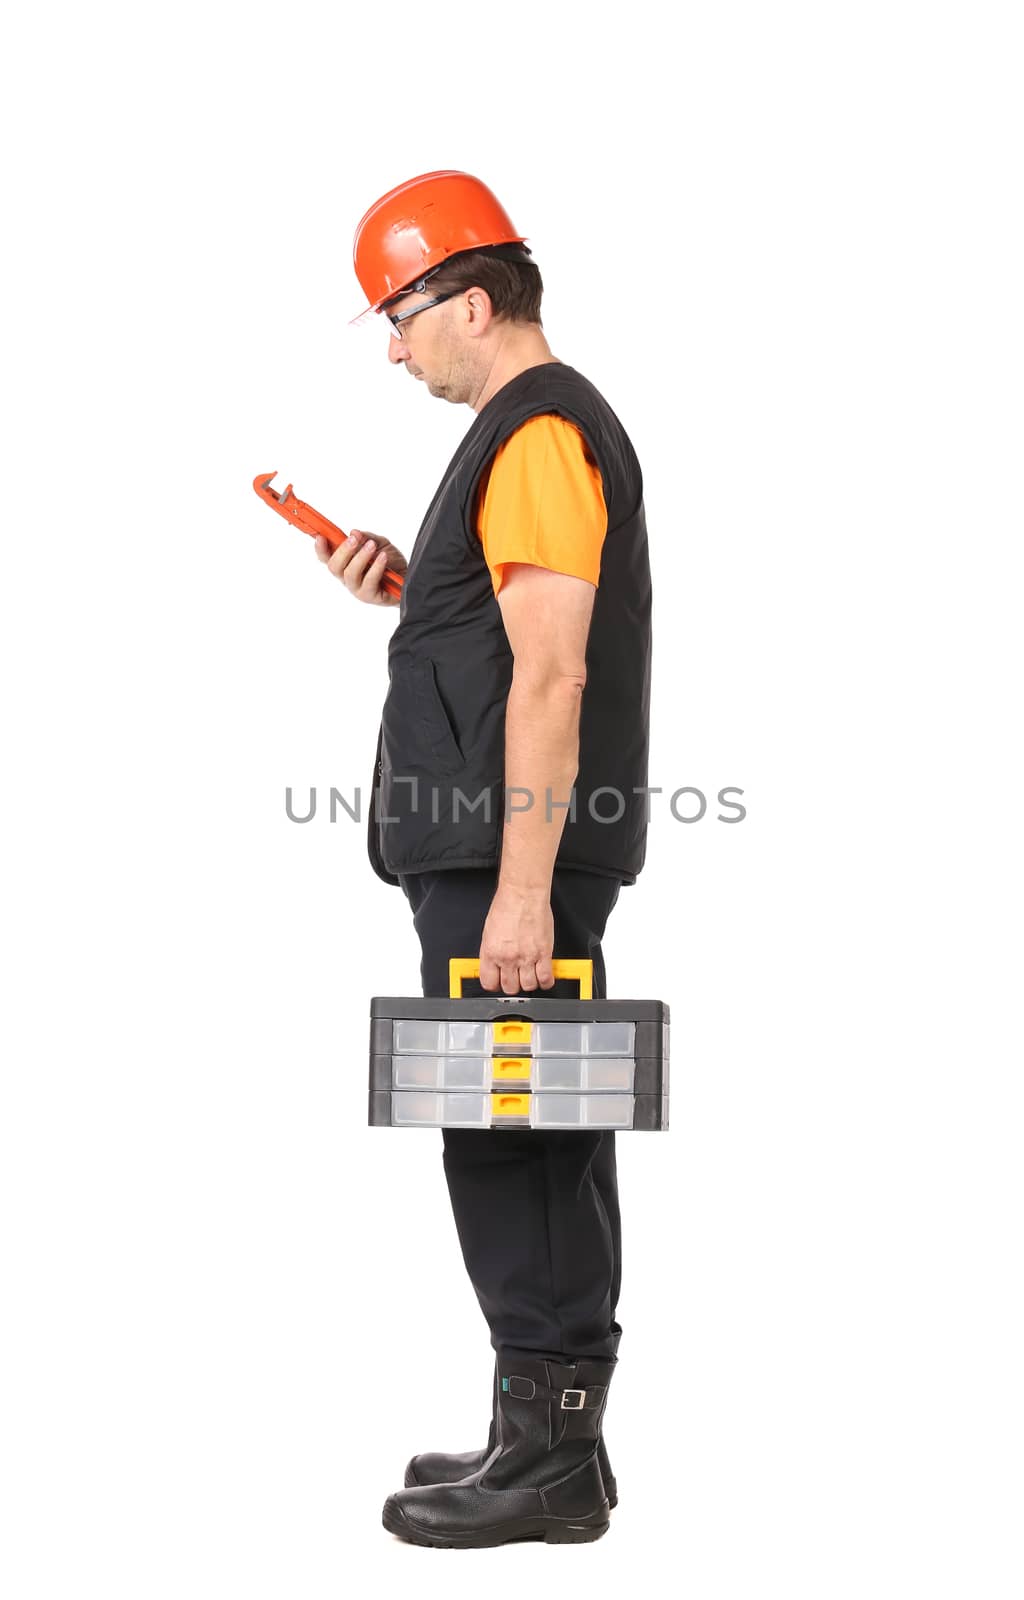 Man in red hard hat looking at wrench. Isolated on a white background.